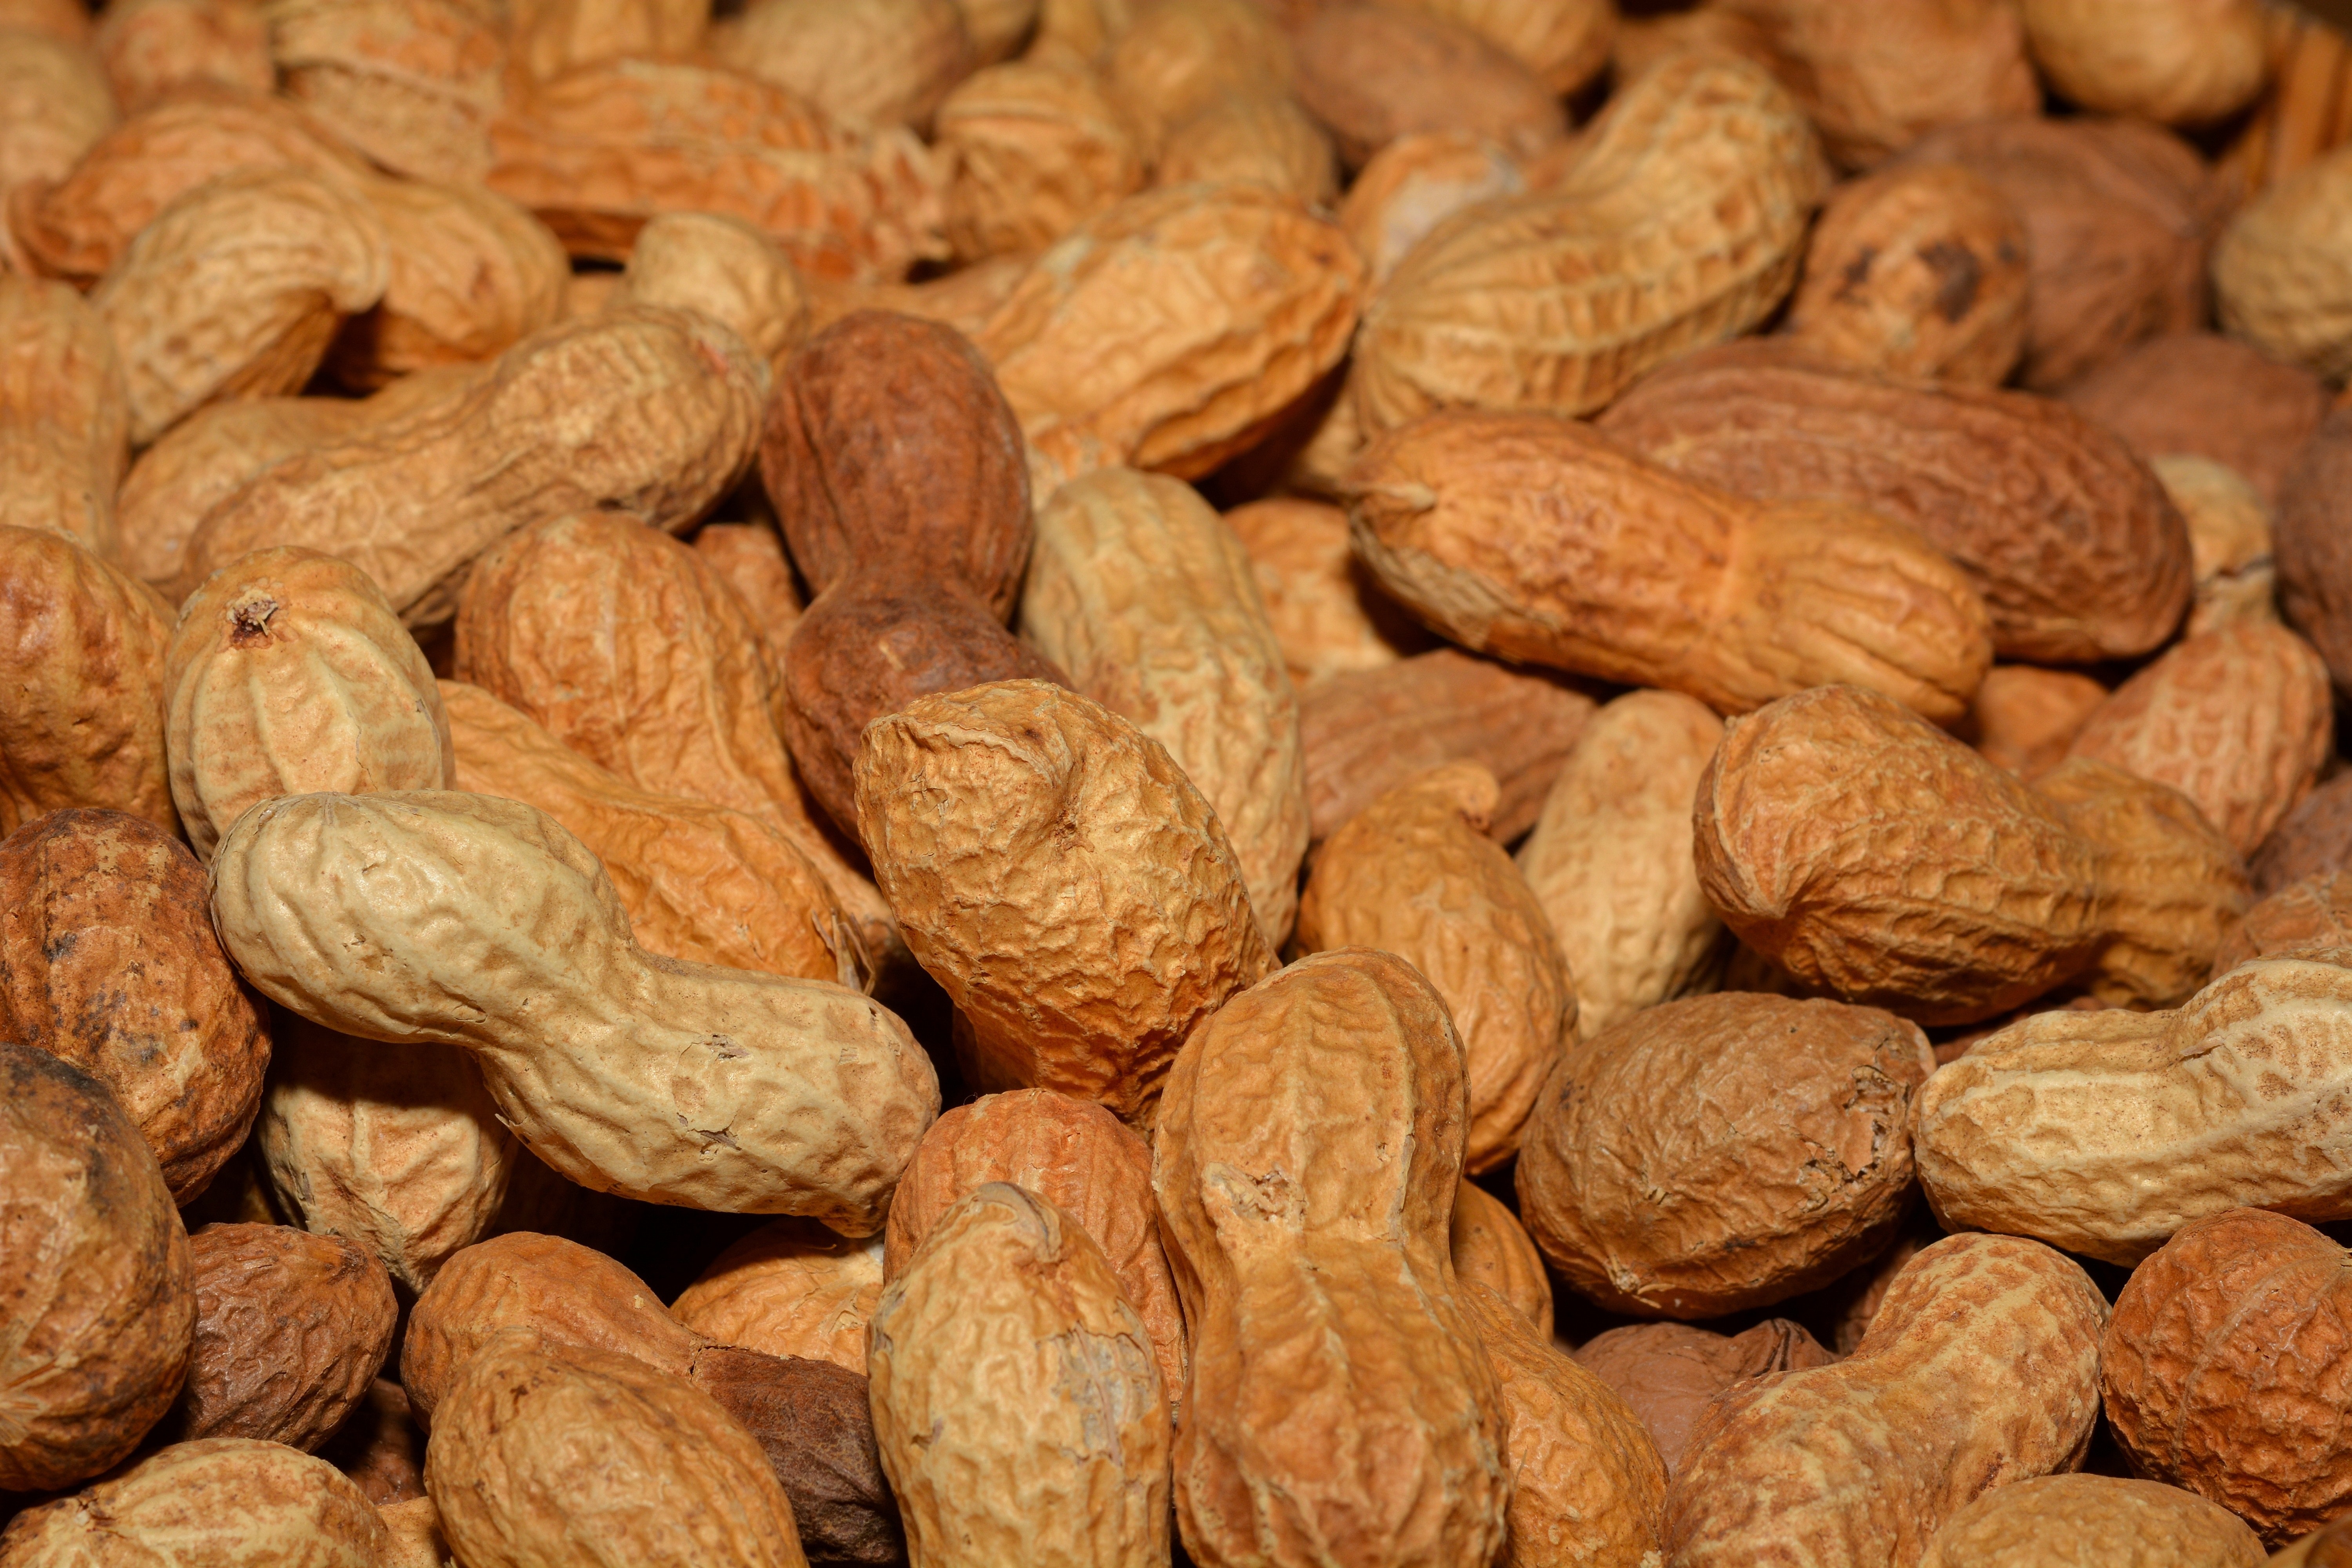 OIT or Oral immunotherapy could be useful to treat food allergies like peanut allergy.